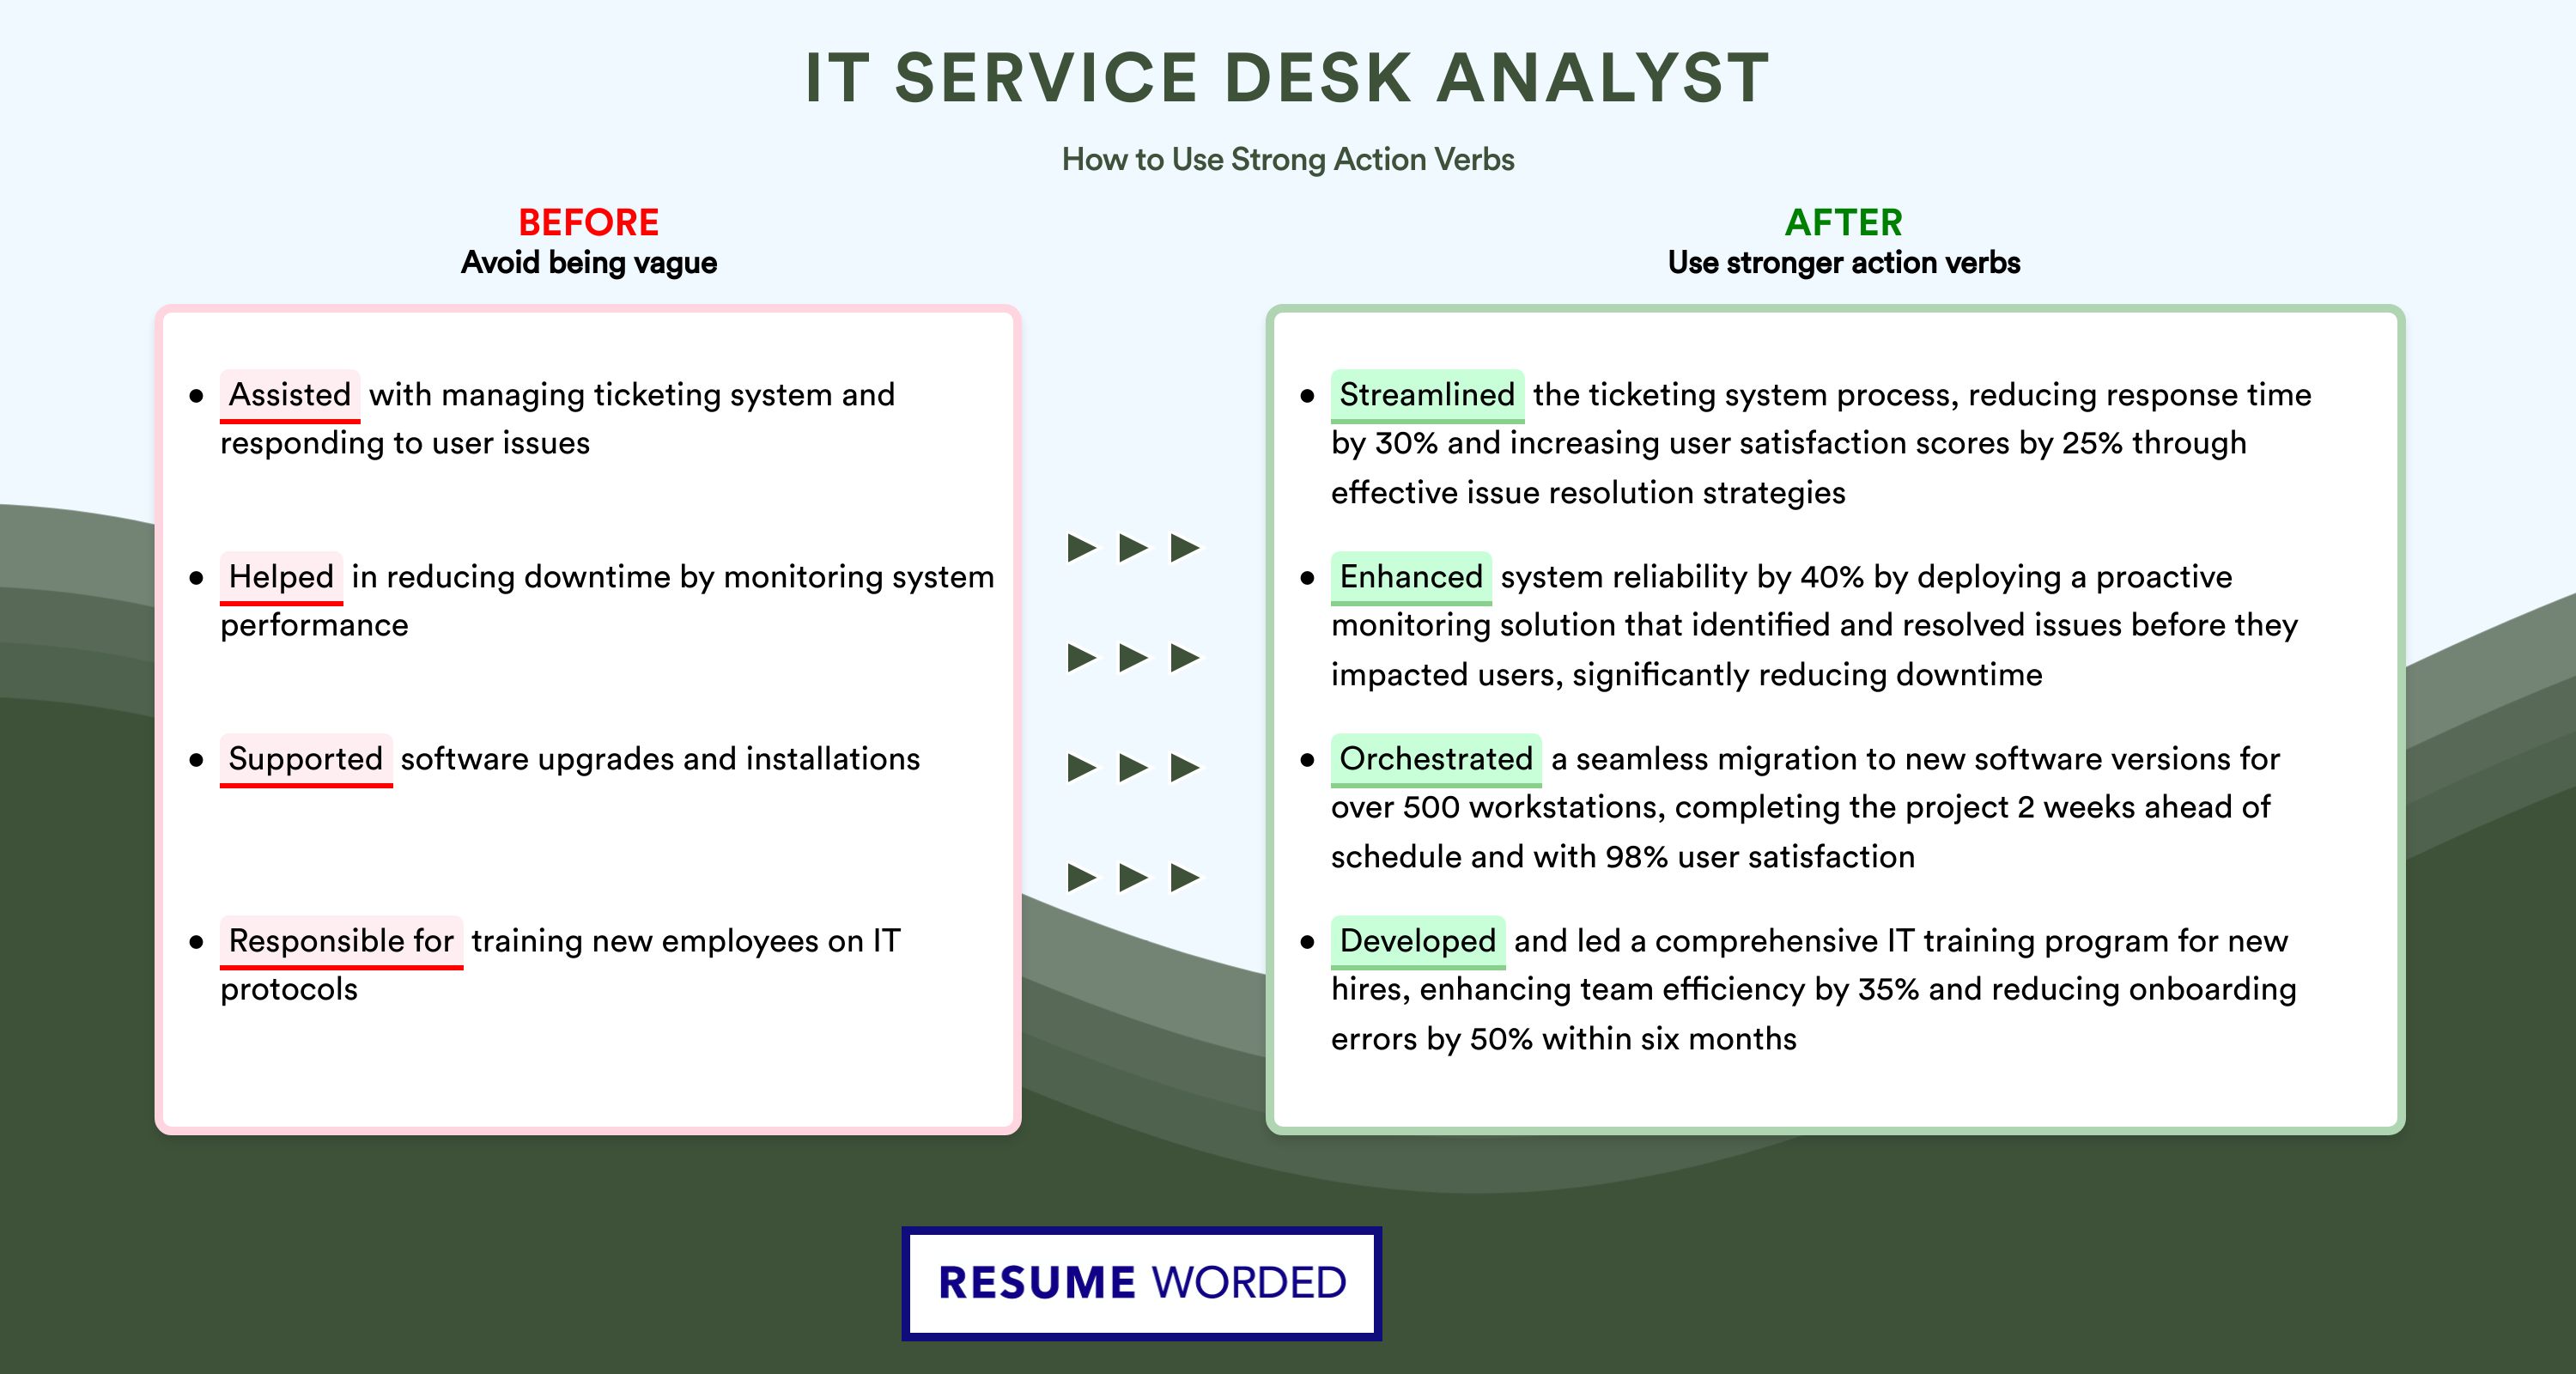 Action Verbs for IT Service Desk Analyst